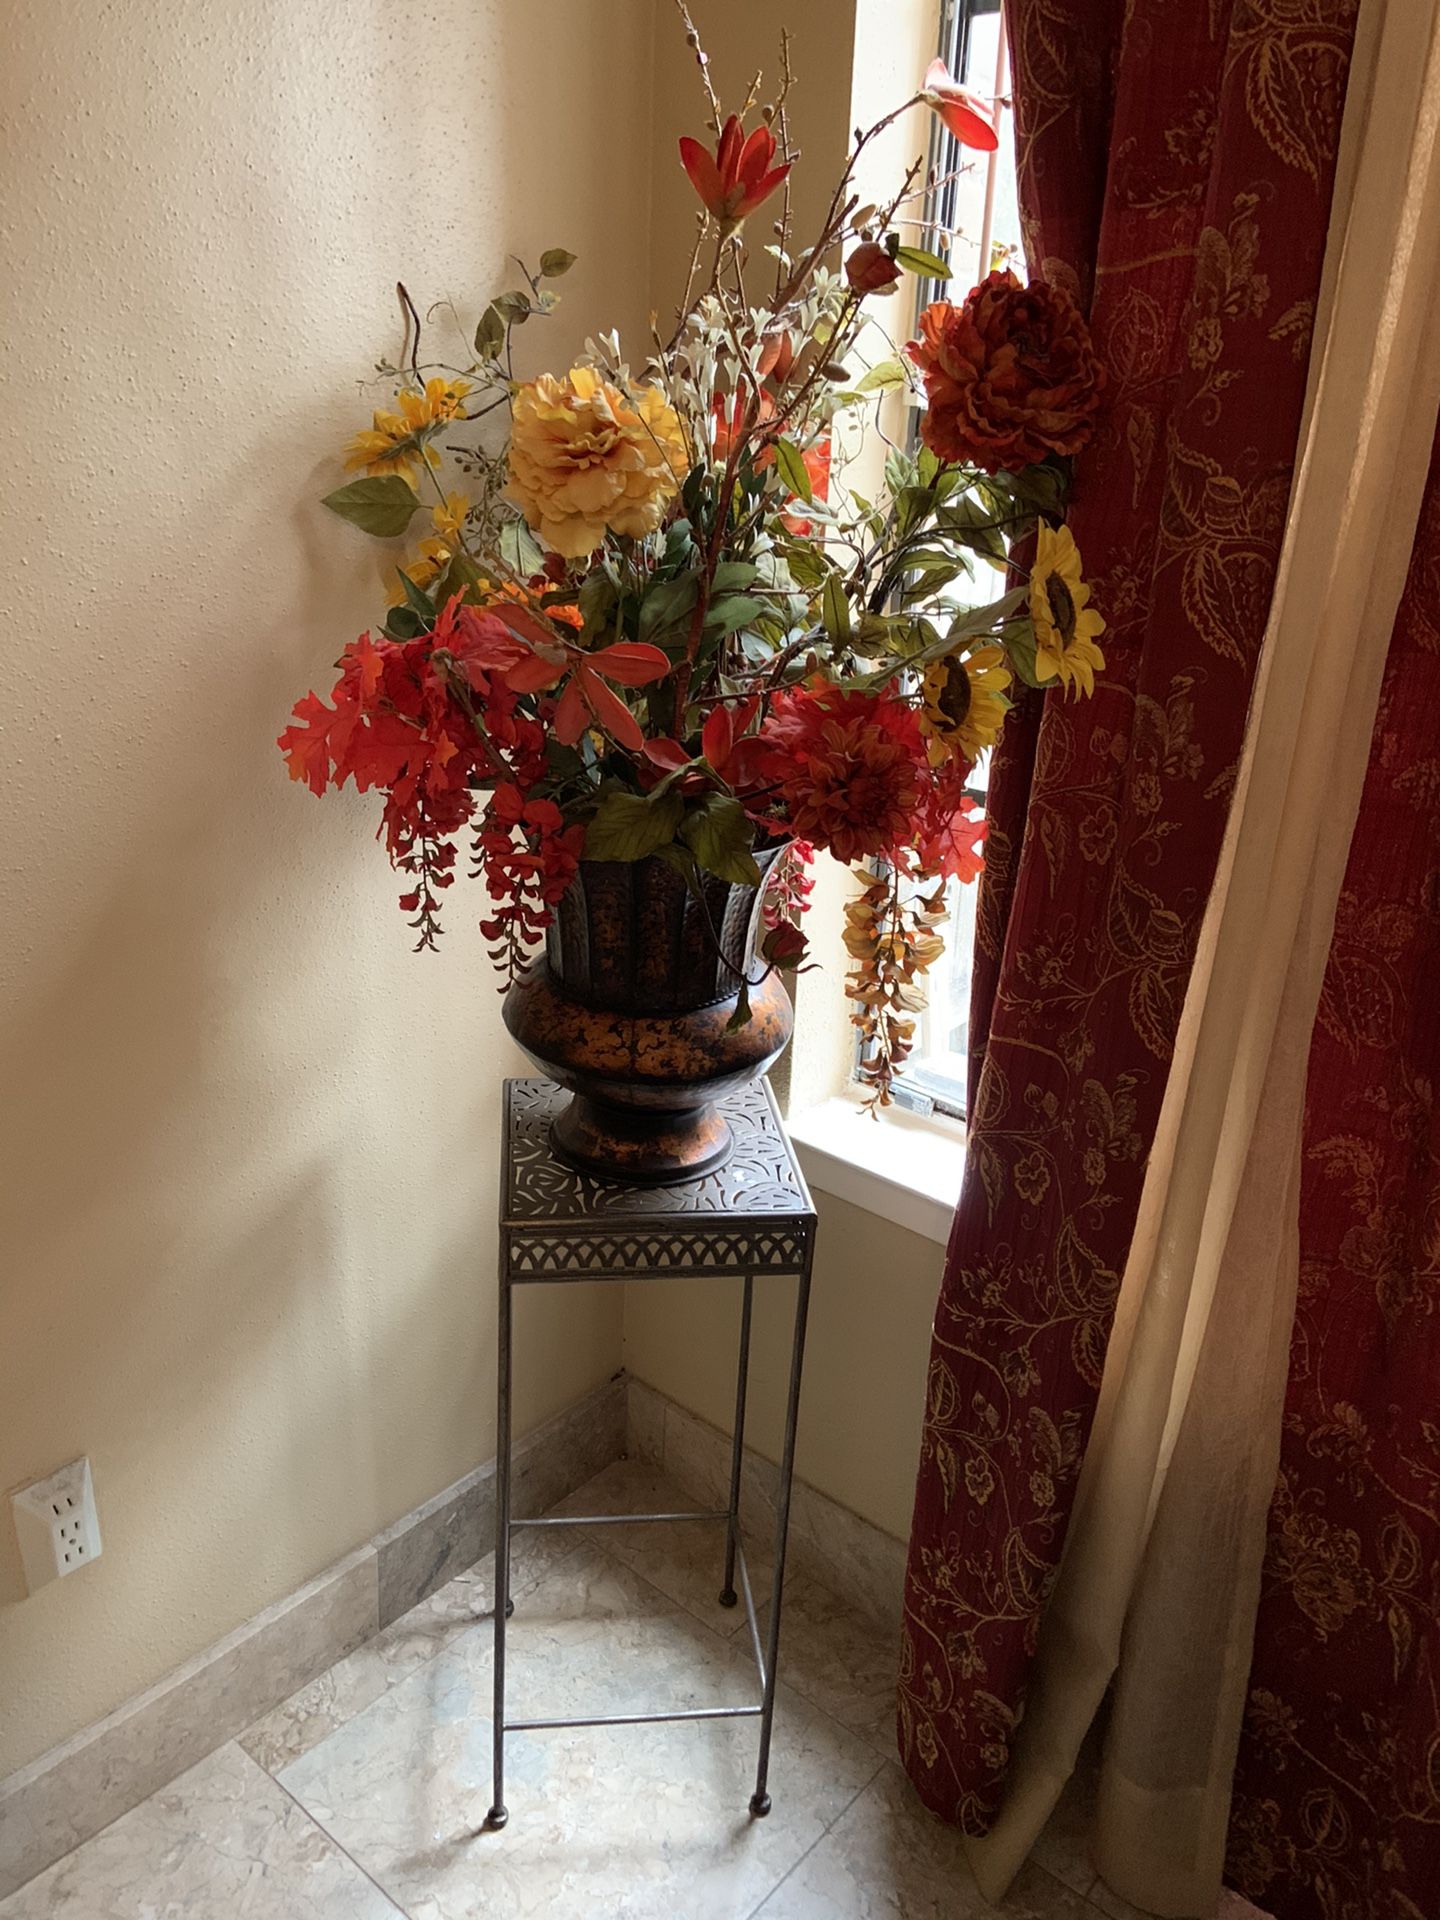 Flower vase and table